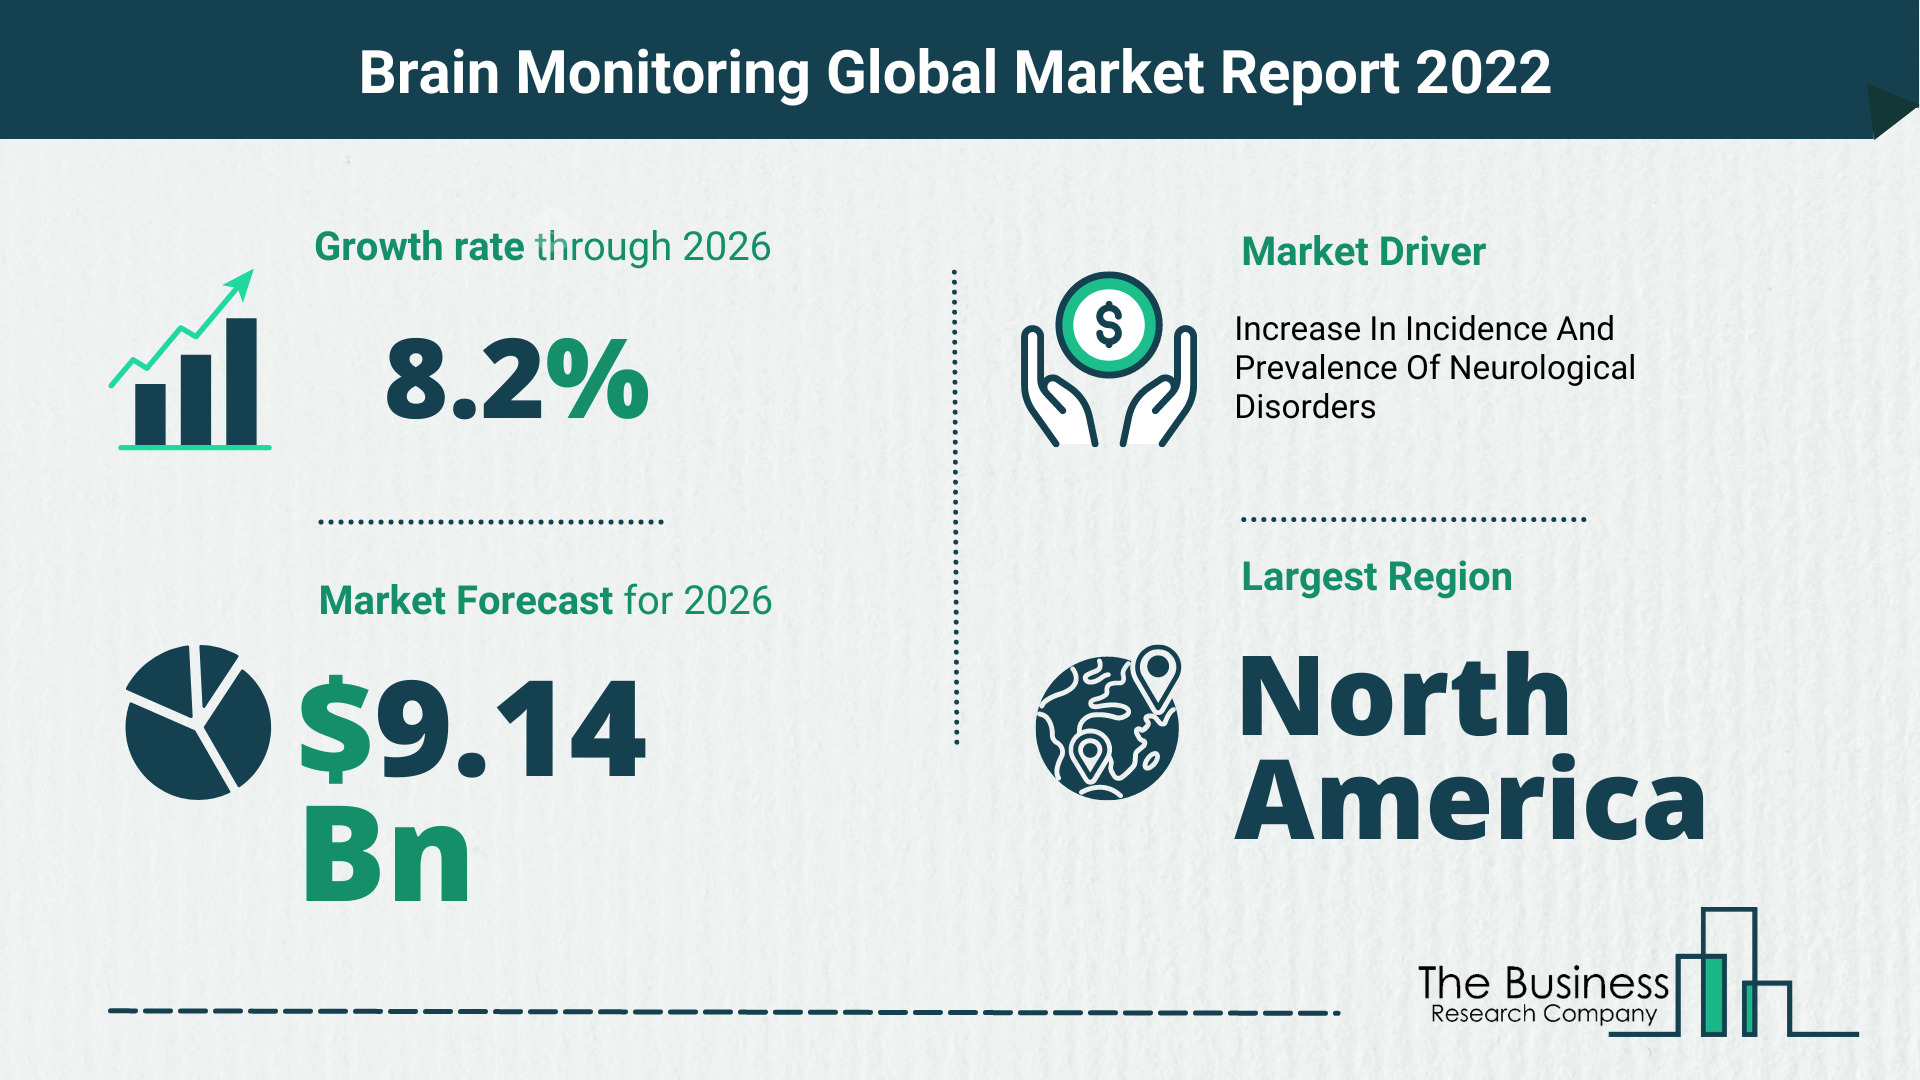 The Brain Monitoring Market Share, Market Size, And Growth Rate 2022